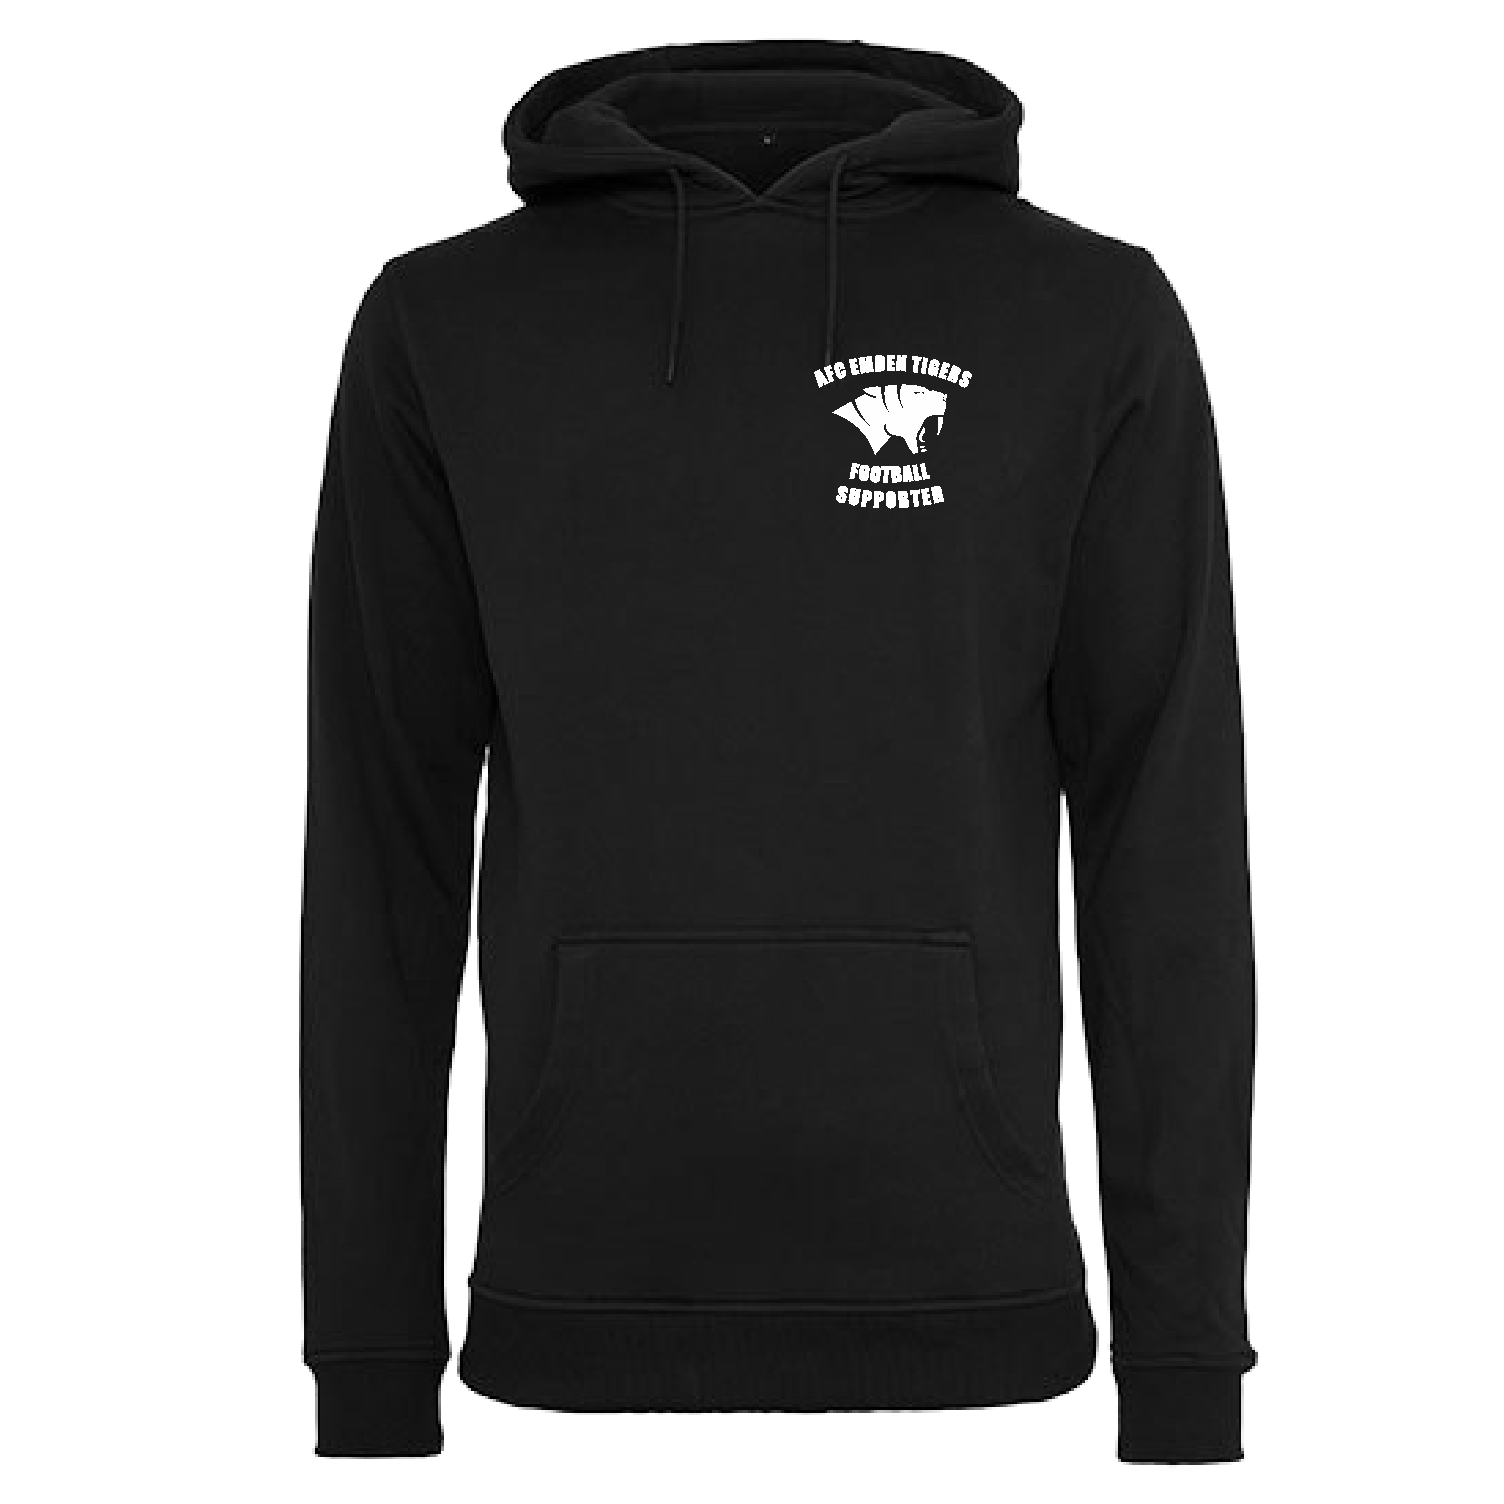 AFC Supporter Hoodie